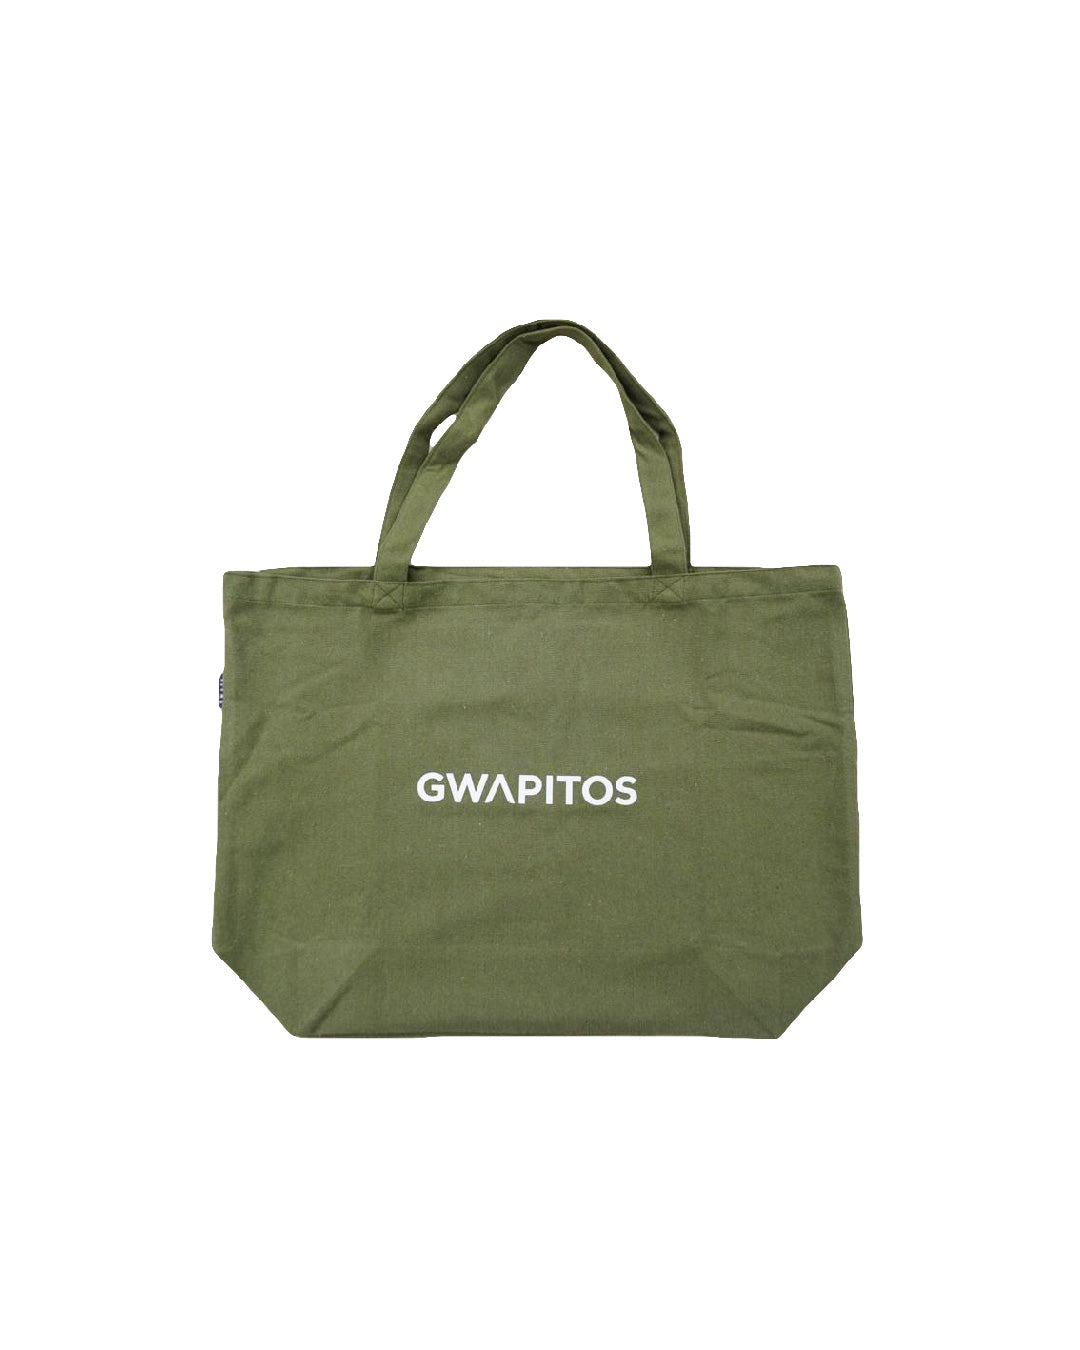 Classic Tote in Olive Green